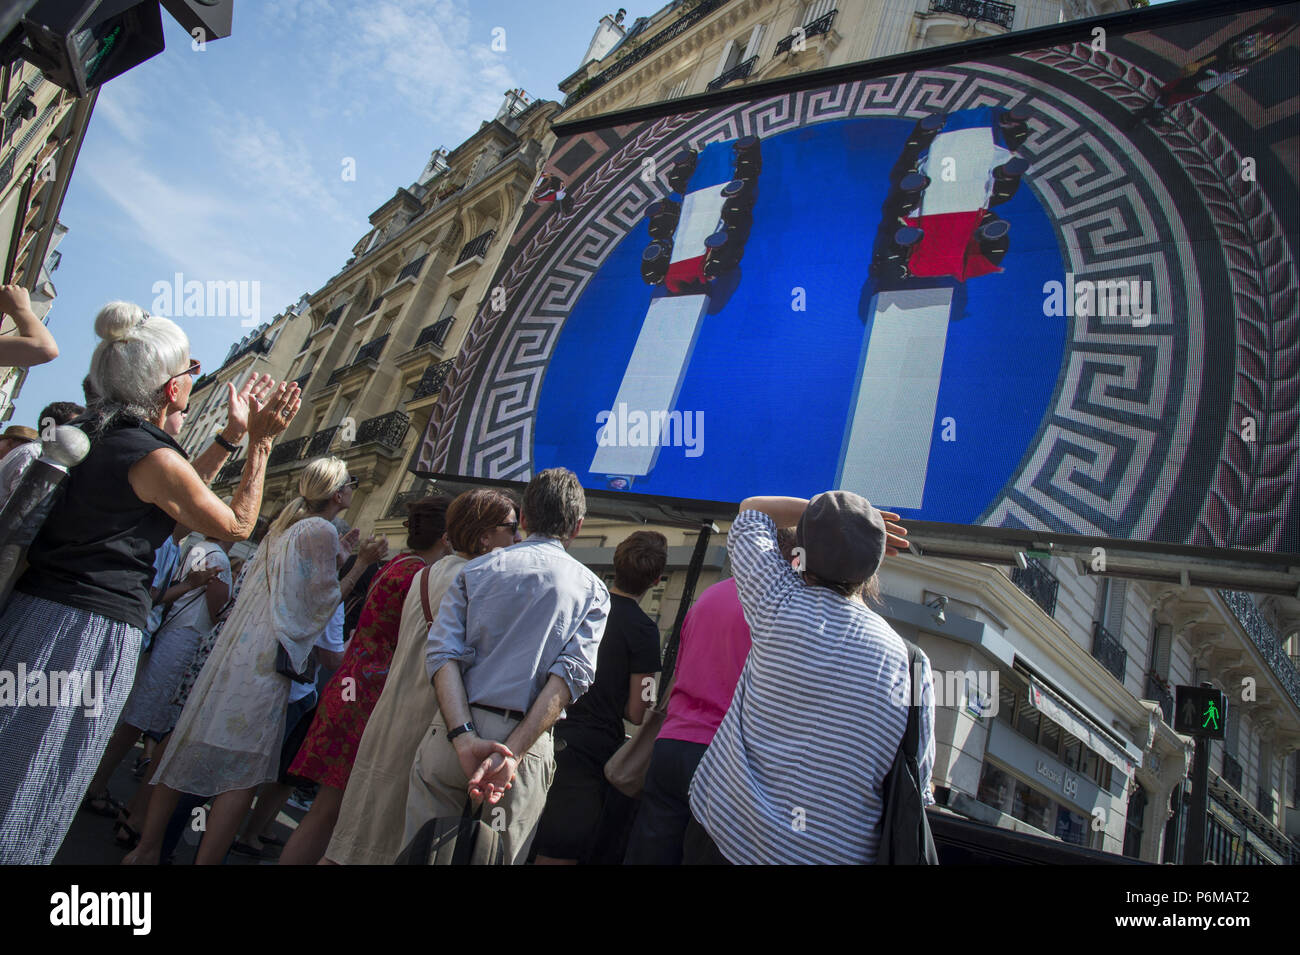 Paris, Ile de France, France. 1st July, 2018. People are seen watching the burial ceremony on a huge screen.Burial ceremony at the Pantheon of former French politician and Holocaust survivor Simone Veil and her husband Antoine Veil in Paris. Former Health Minister, Simone Veil, who passed away on June 30, 2017 became president of the European Parliament and one of France's most revered politicians by advocating the 1975 law legalizing abortion in France. Credit: Thierry Le Fouille/SOPA Images/ZUMA Wire/Alamy Live News Stock Photo